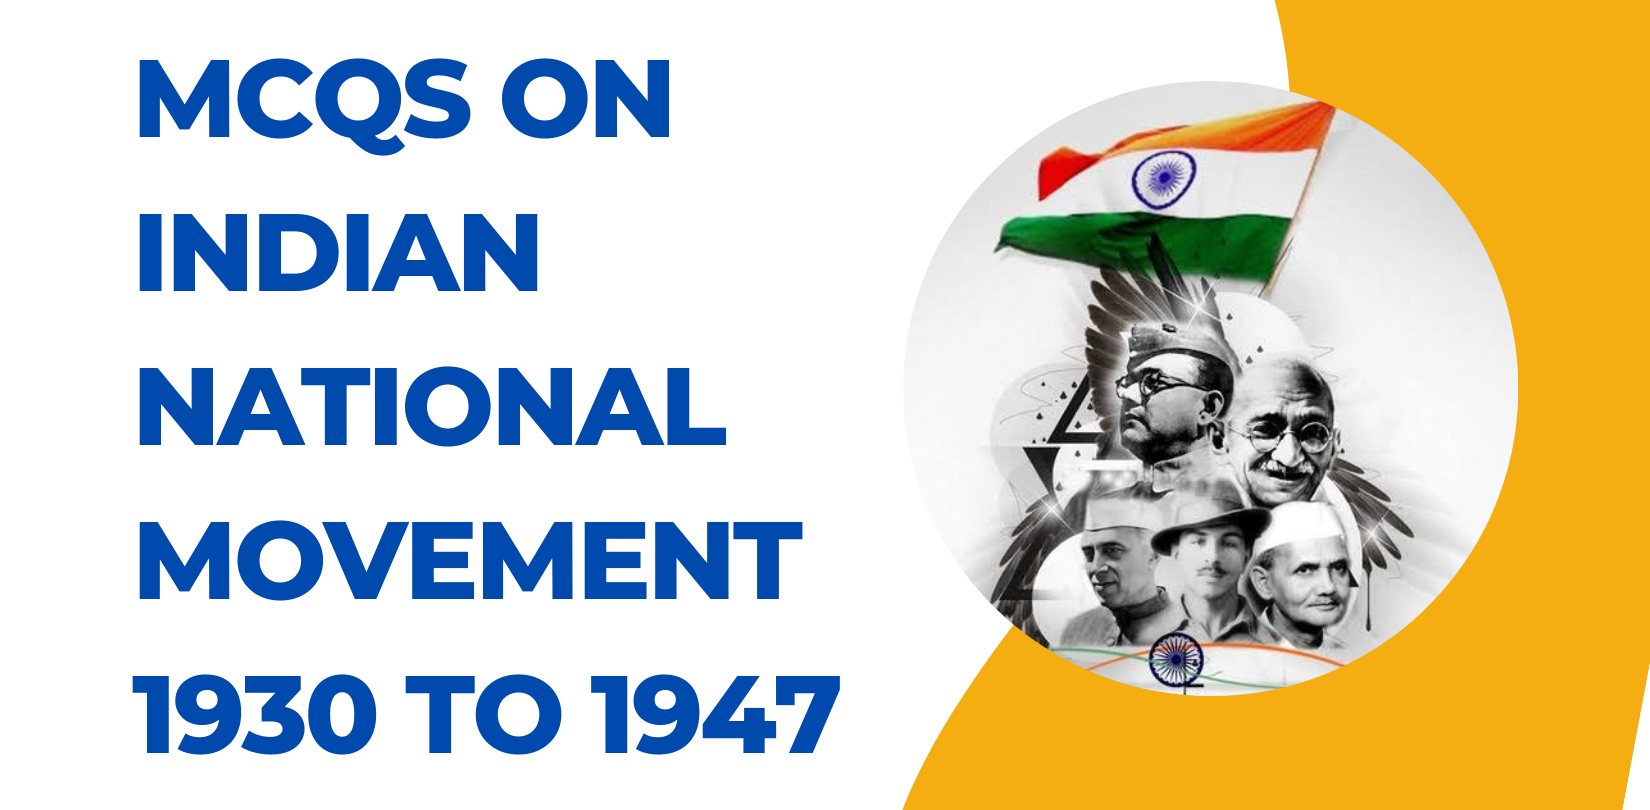 MCQs on Indian National Movement 1930 to 1947